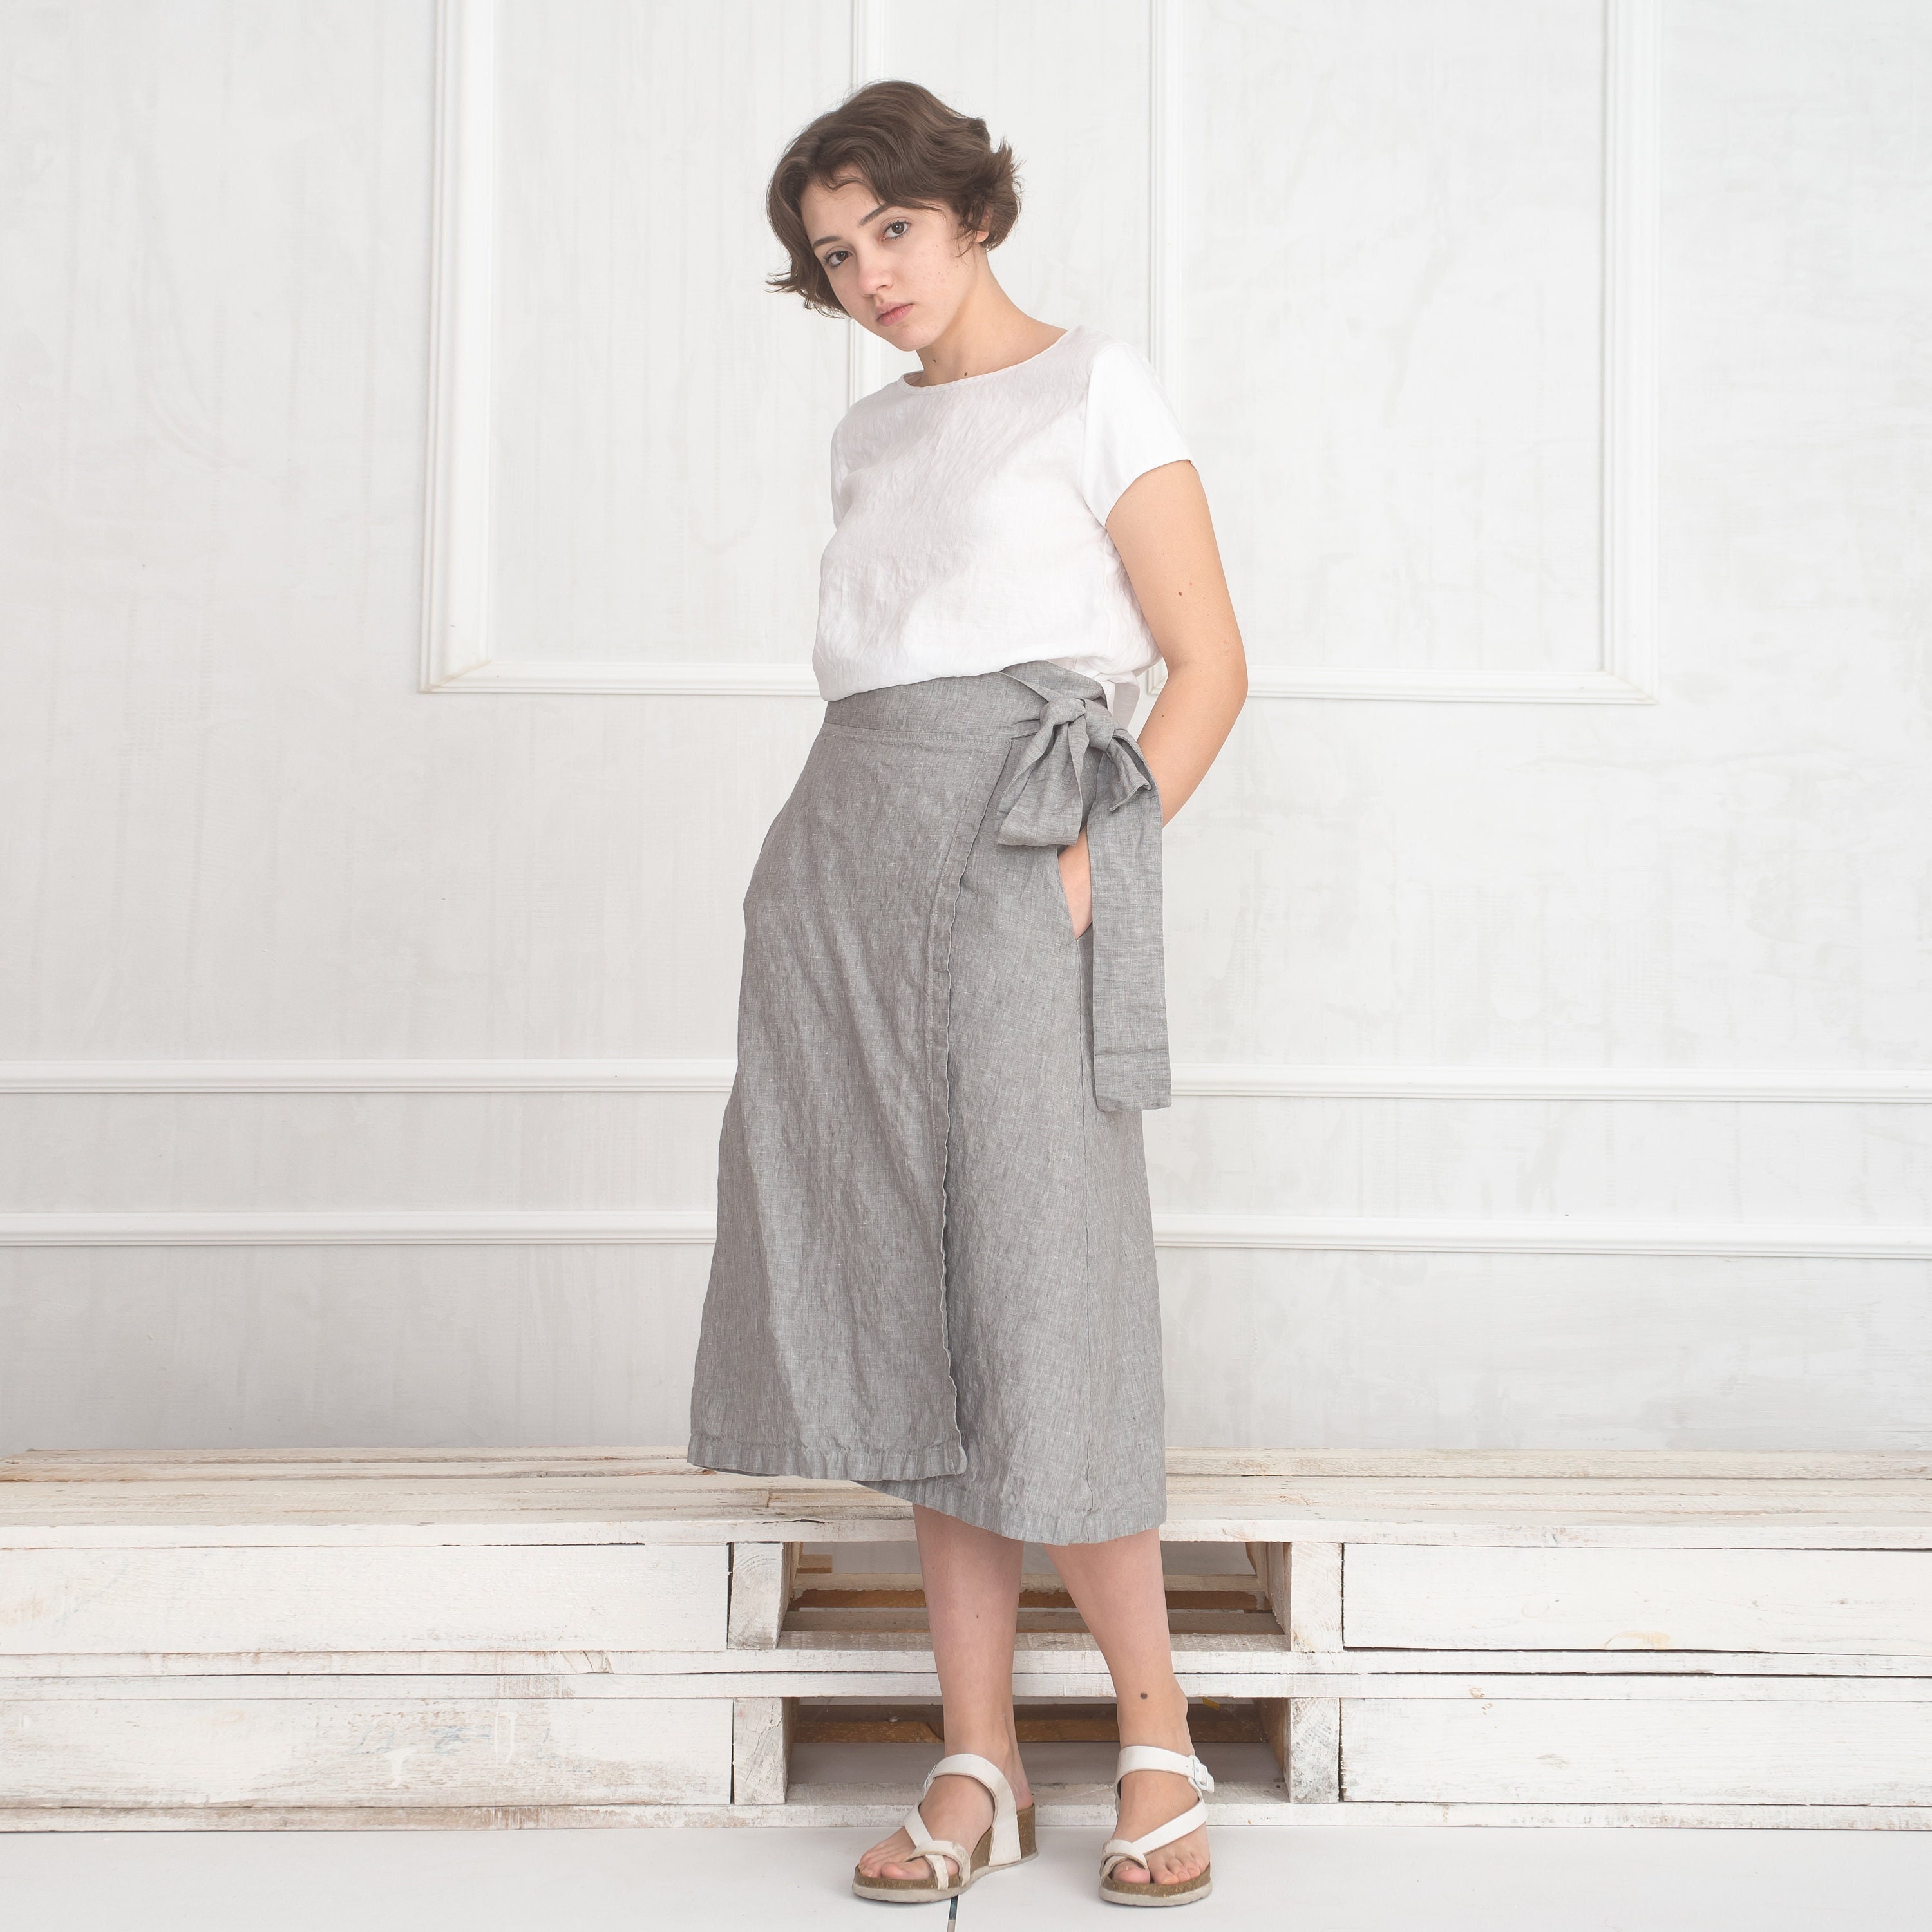 The Laura Skirt Sewing Pattern, by Seamwork